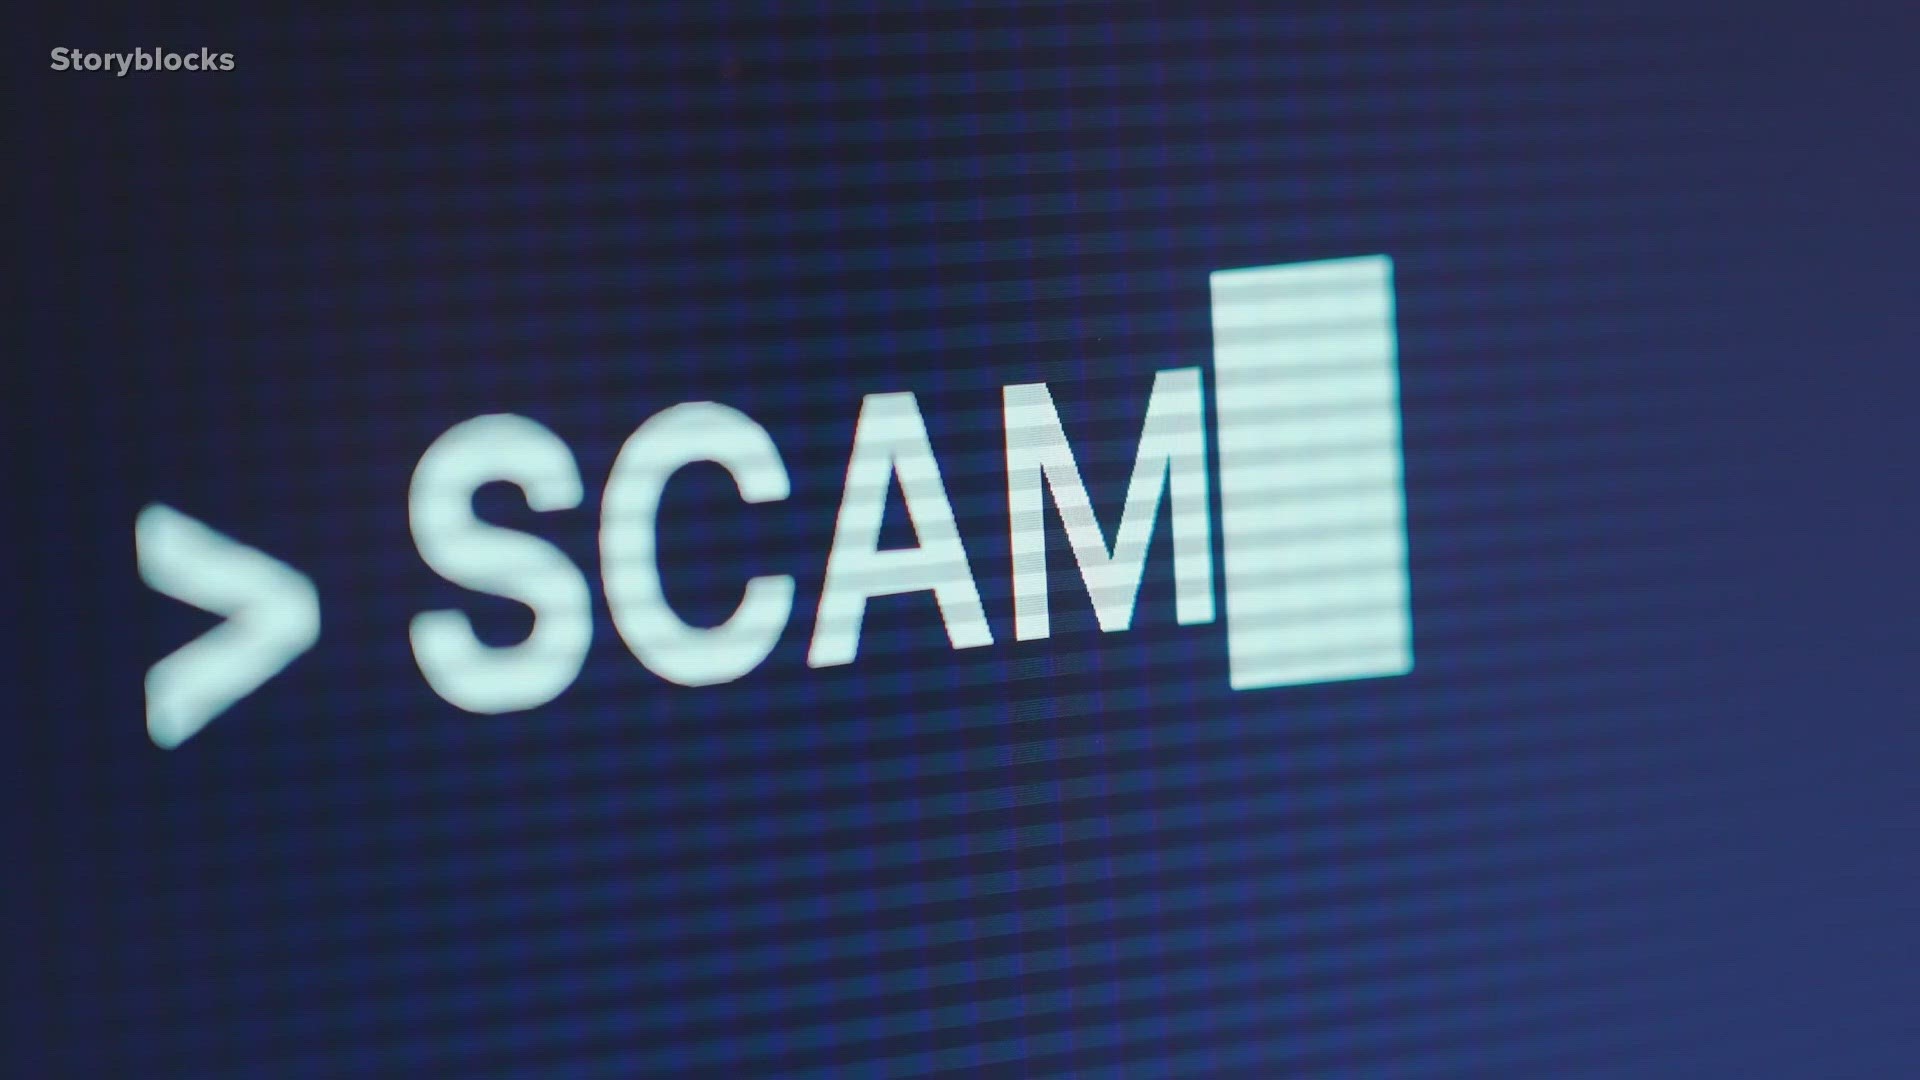 Hear from a concerned mother about her experience with the scam.